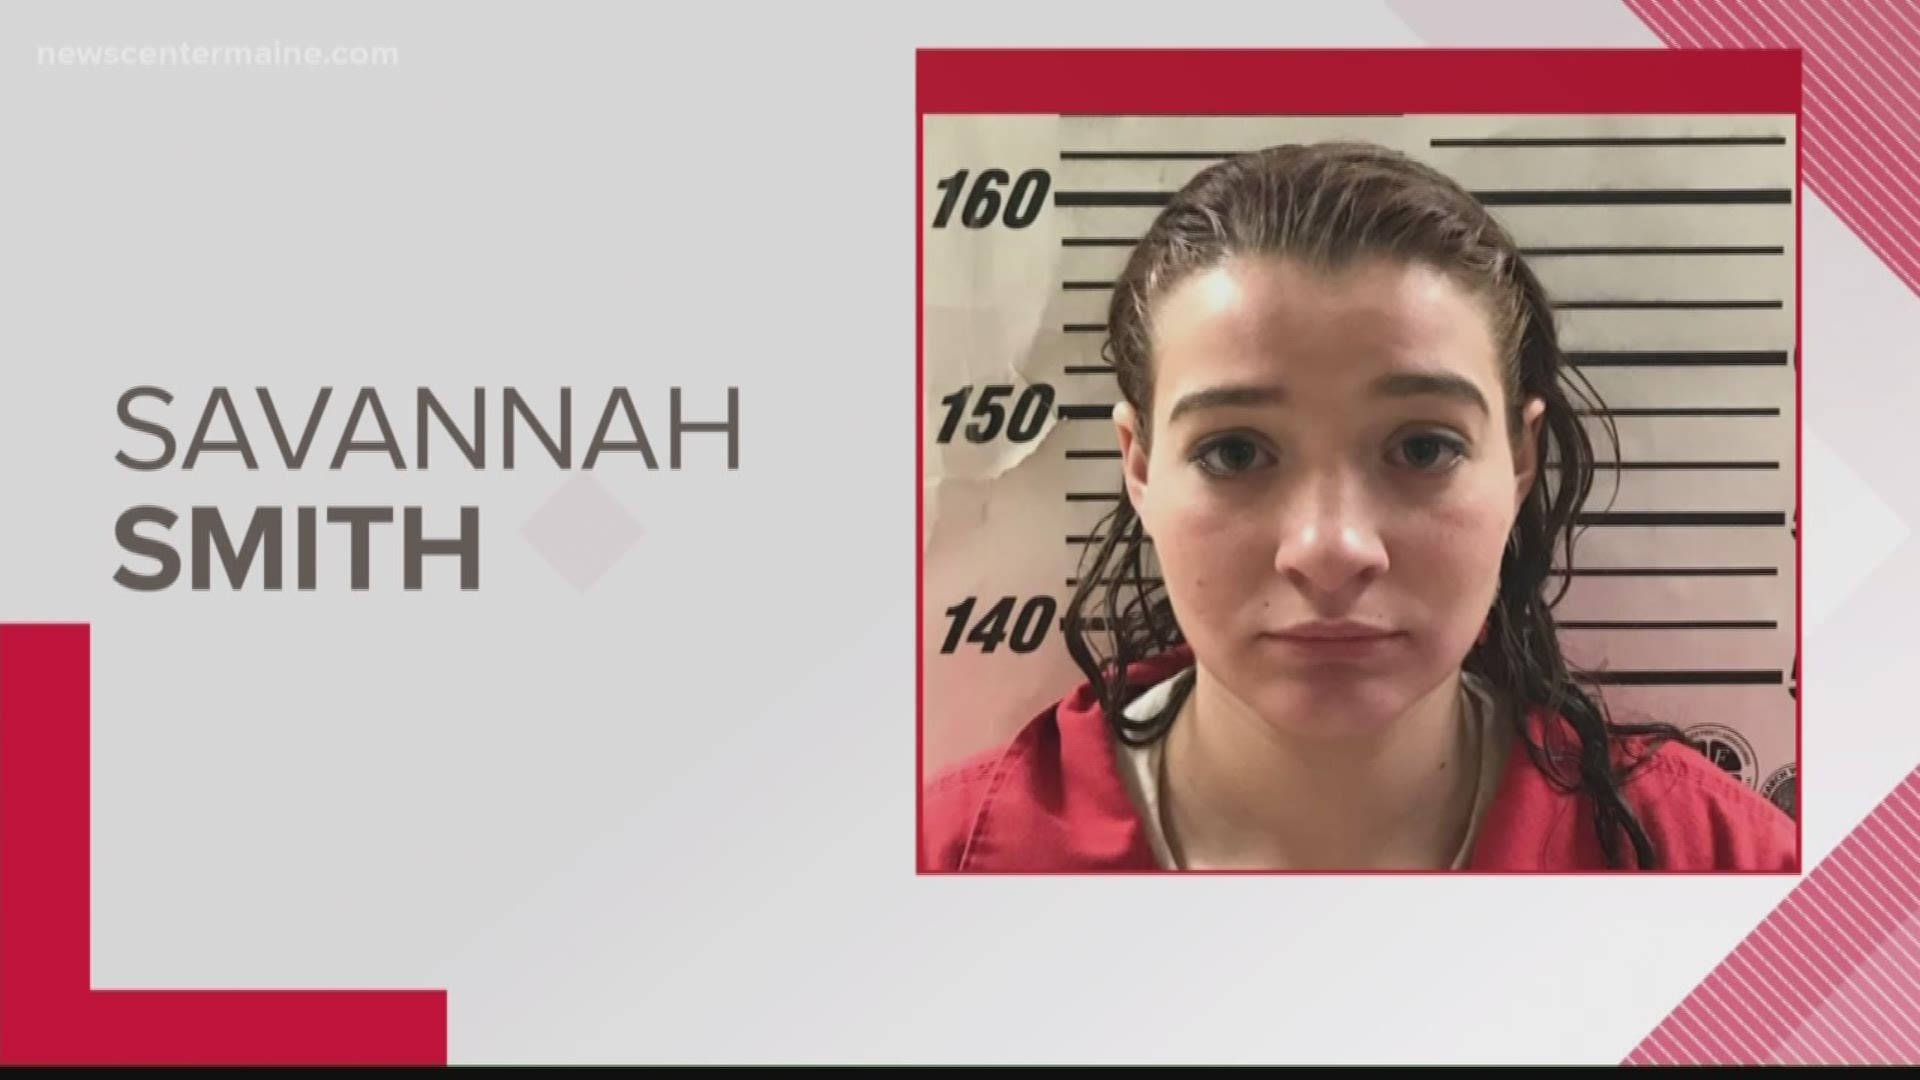 Savannah Smith, 21, of Bucksport was indicted by grand jury in connection to the 2017 death of Kloe Hawksley.